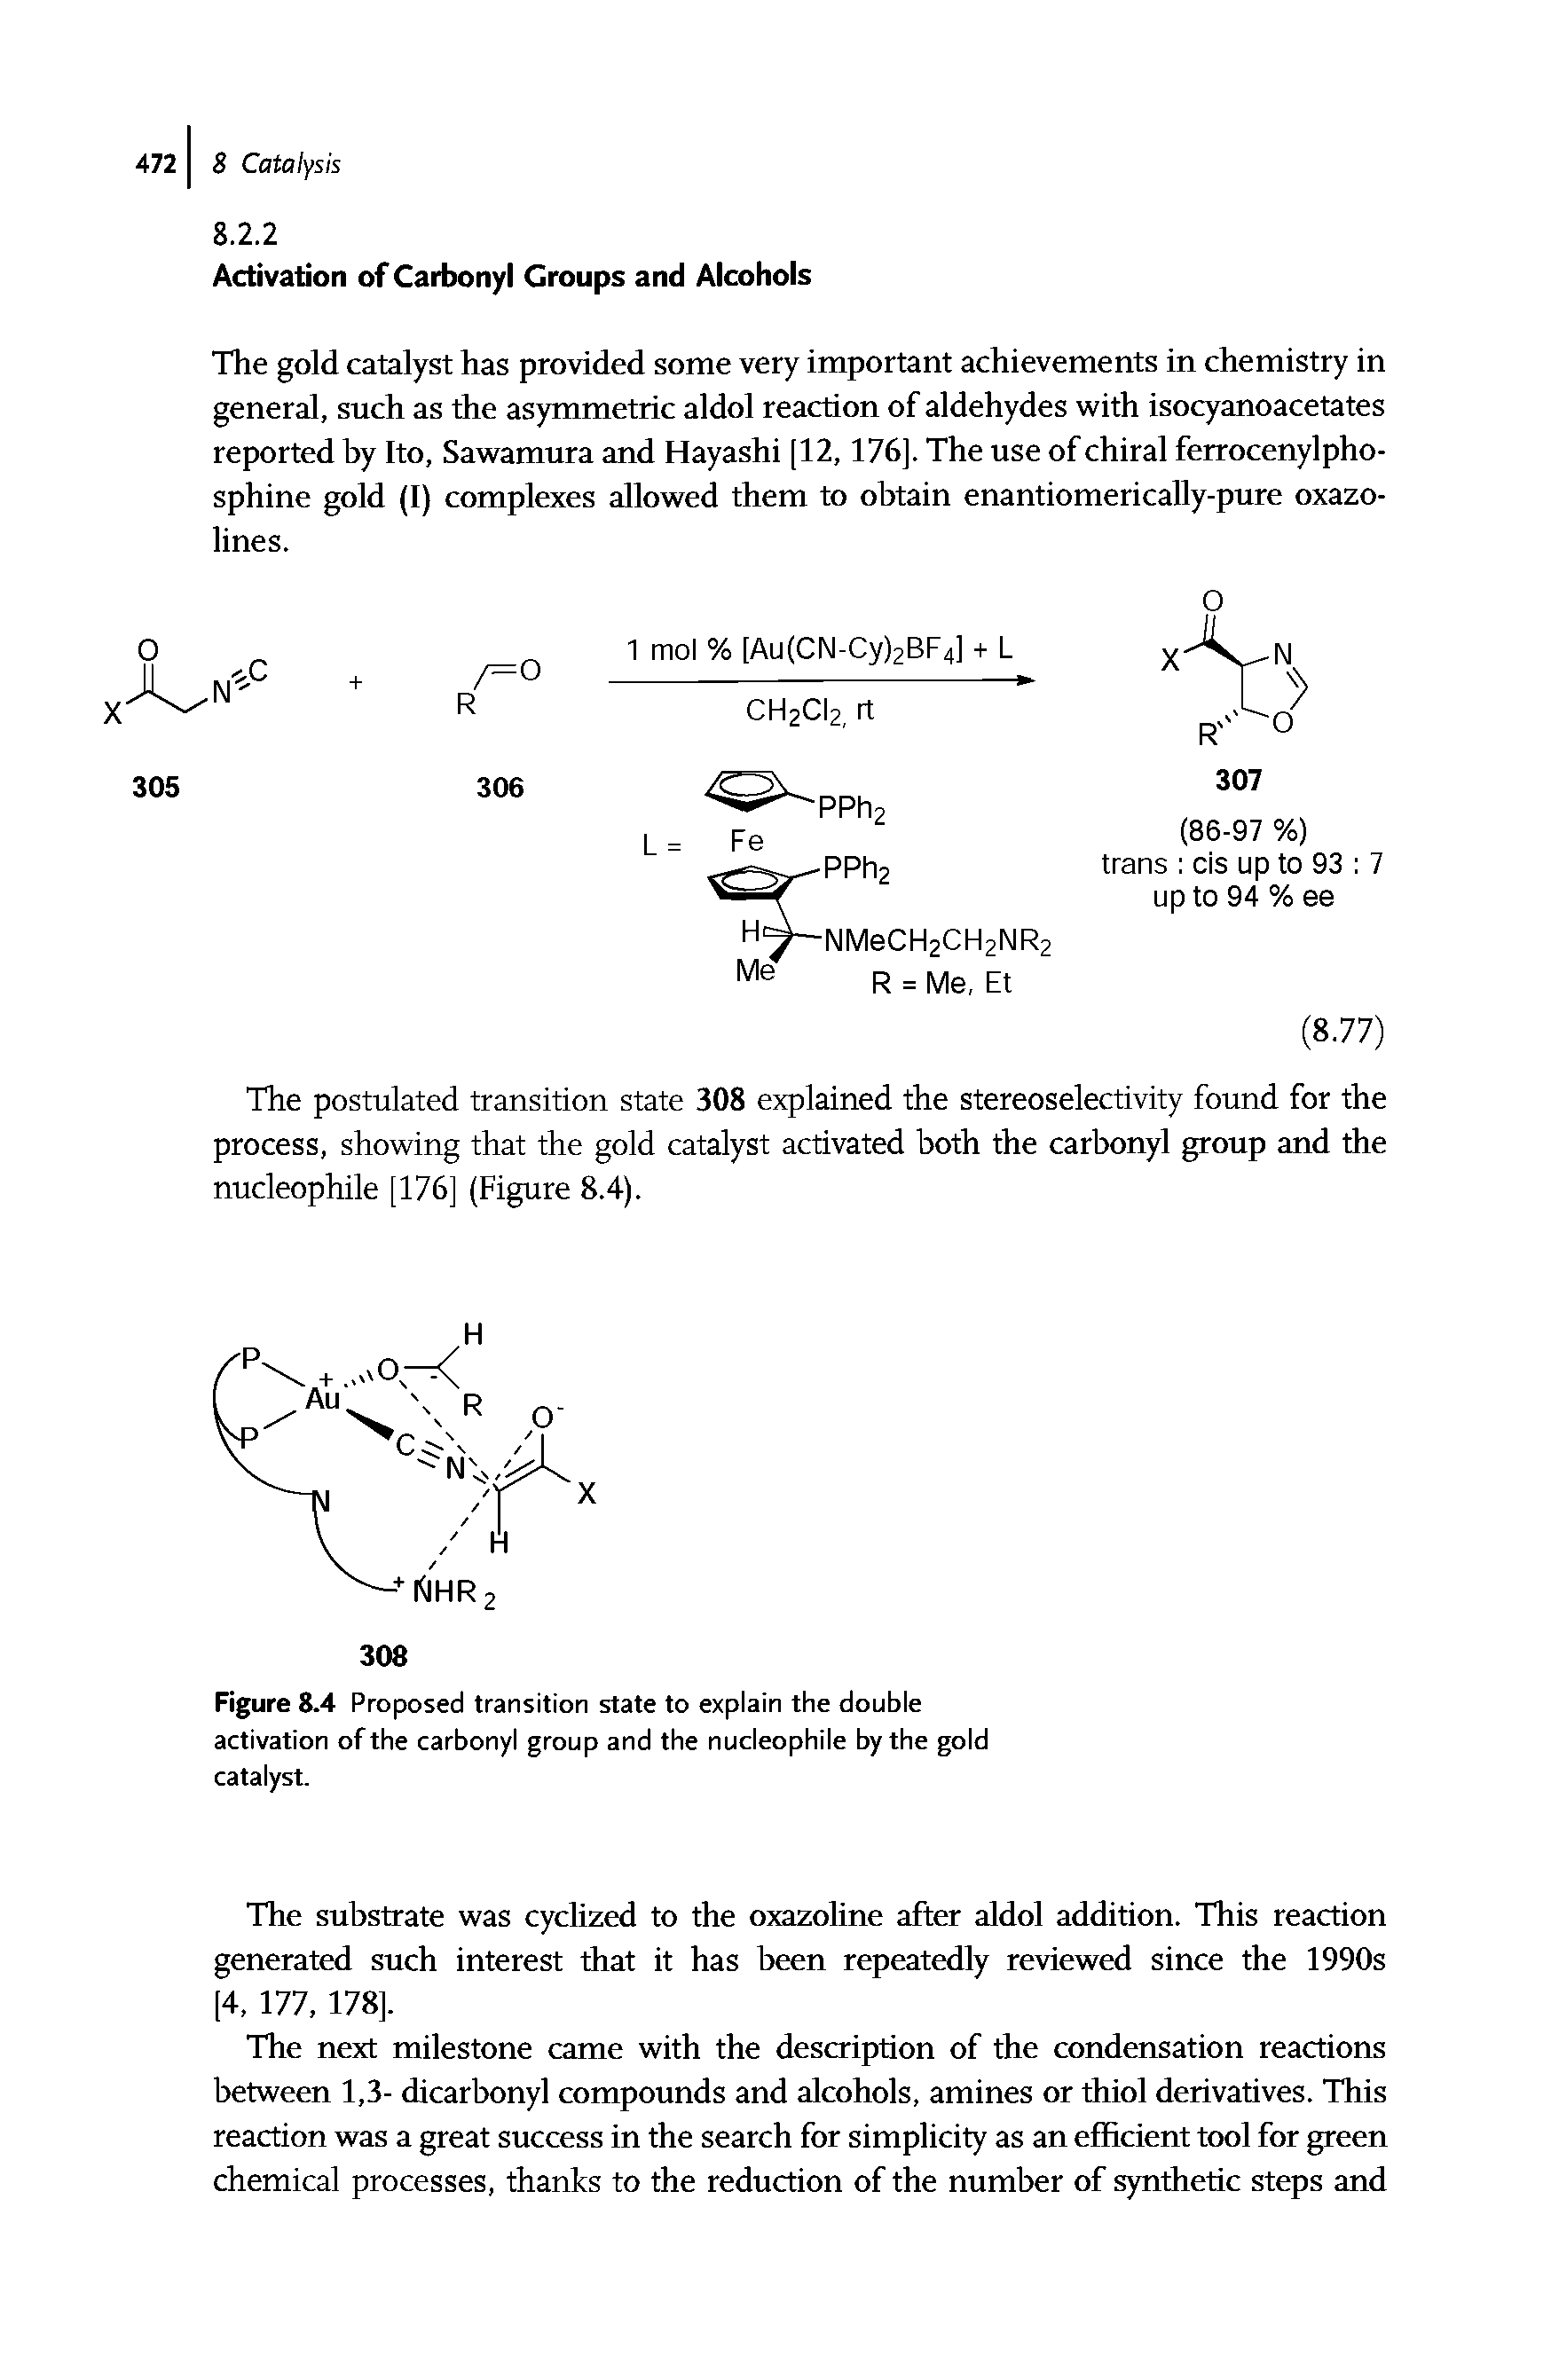 Figure 8.4 Proposed transition state to explain the double activation of the carbonyl group and the nucleophile by the gold catalyst.